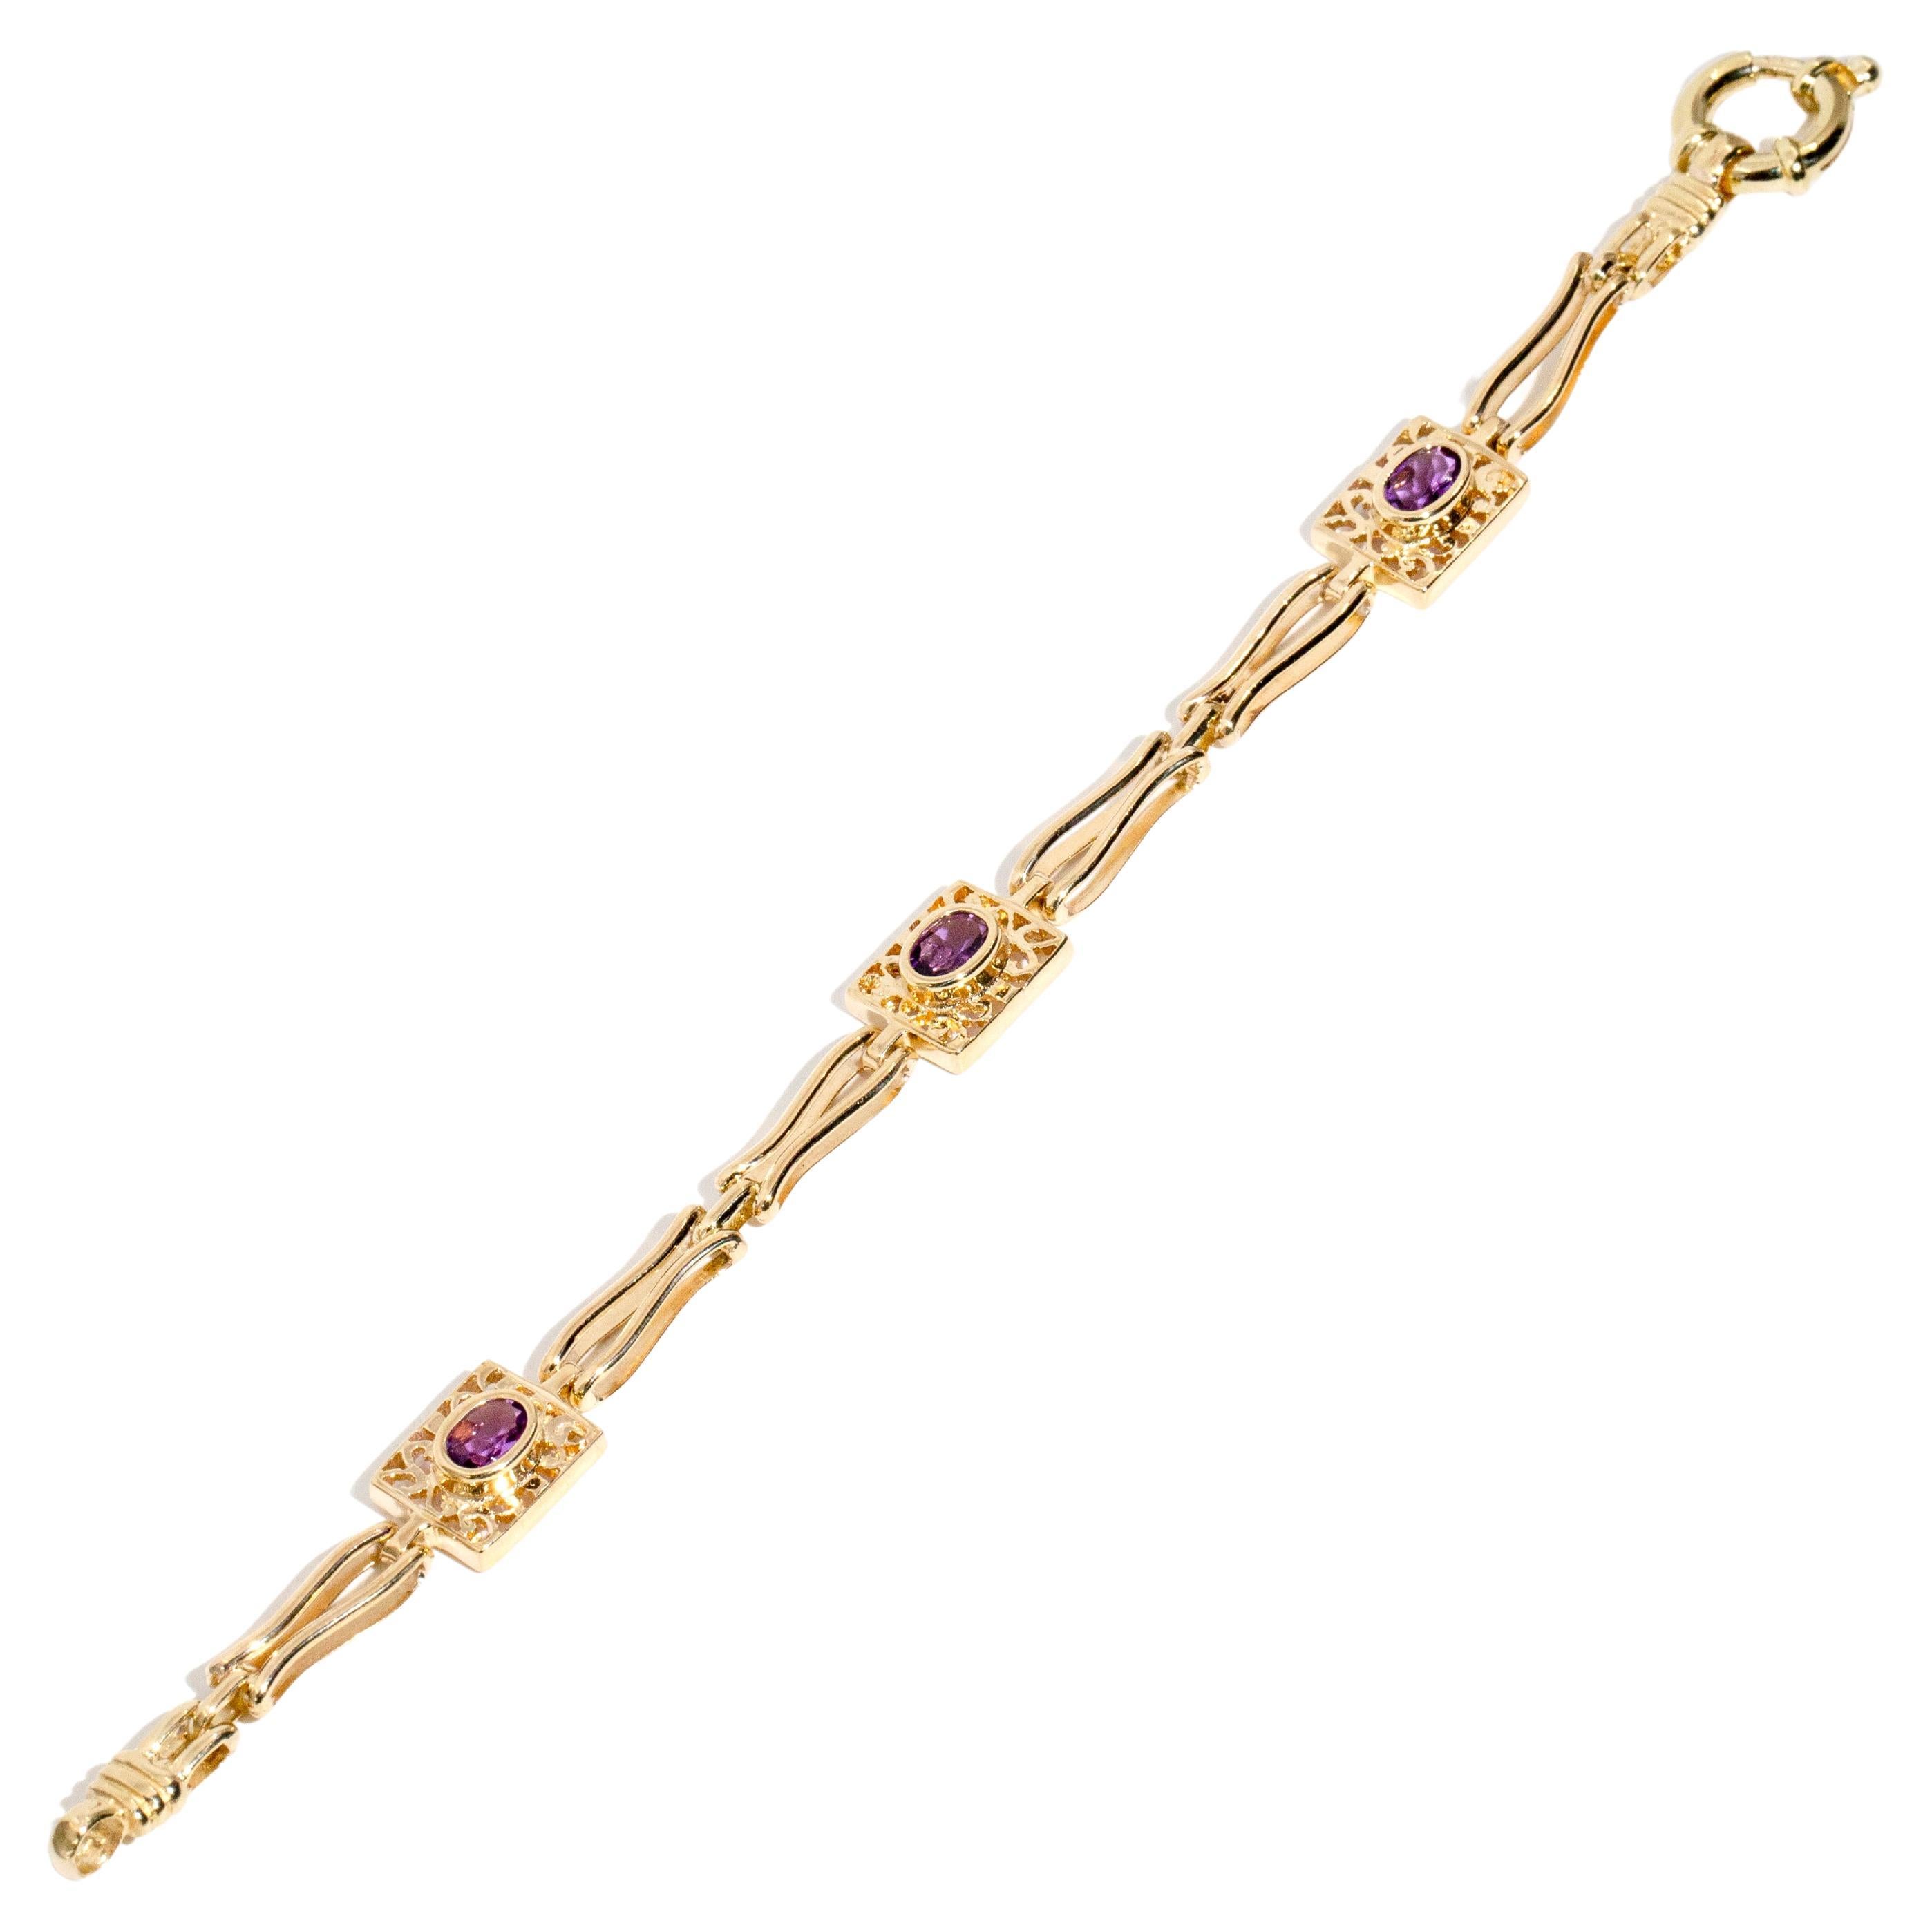 Lovingly crafted in 9 carat yellow gold, this charming vintage bracelet, circa 1990s, is a sequence of three filigree settings each holding a raised oval rubover set amethyst and interlinked by pairs of elegant double-bar links. Her name is The